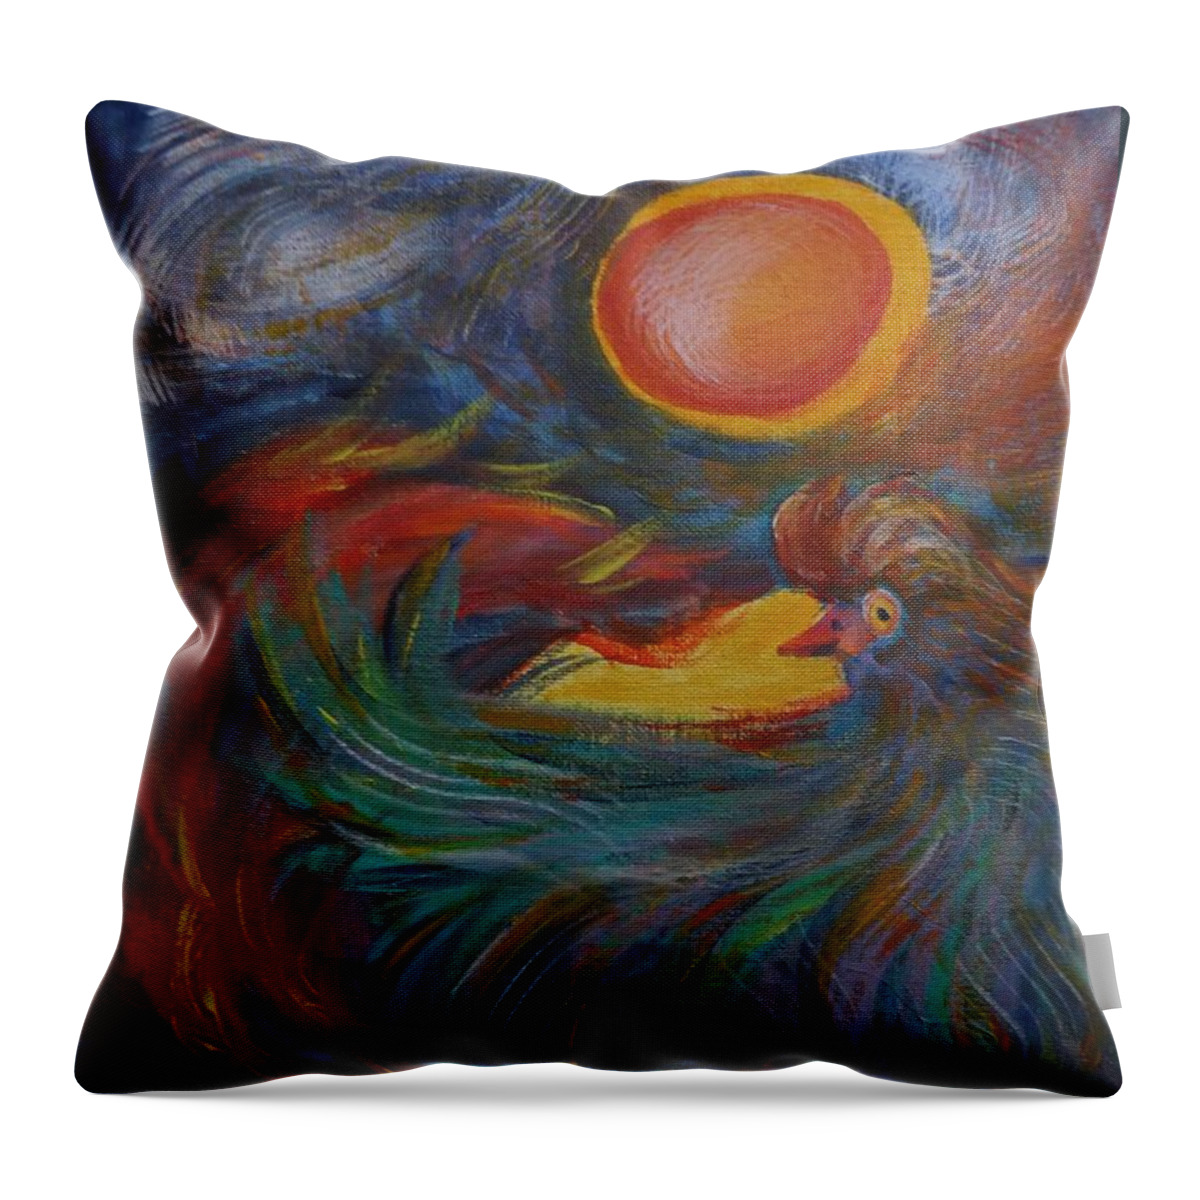 Flight Throw Pillow featuring the painting Flight Of The Phoenix by Robyn King